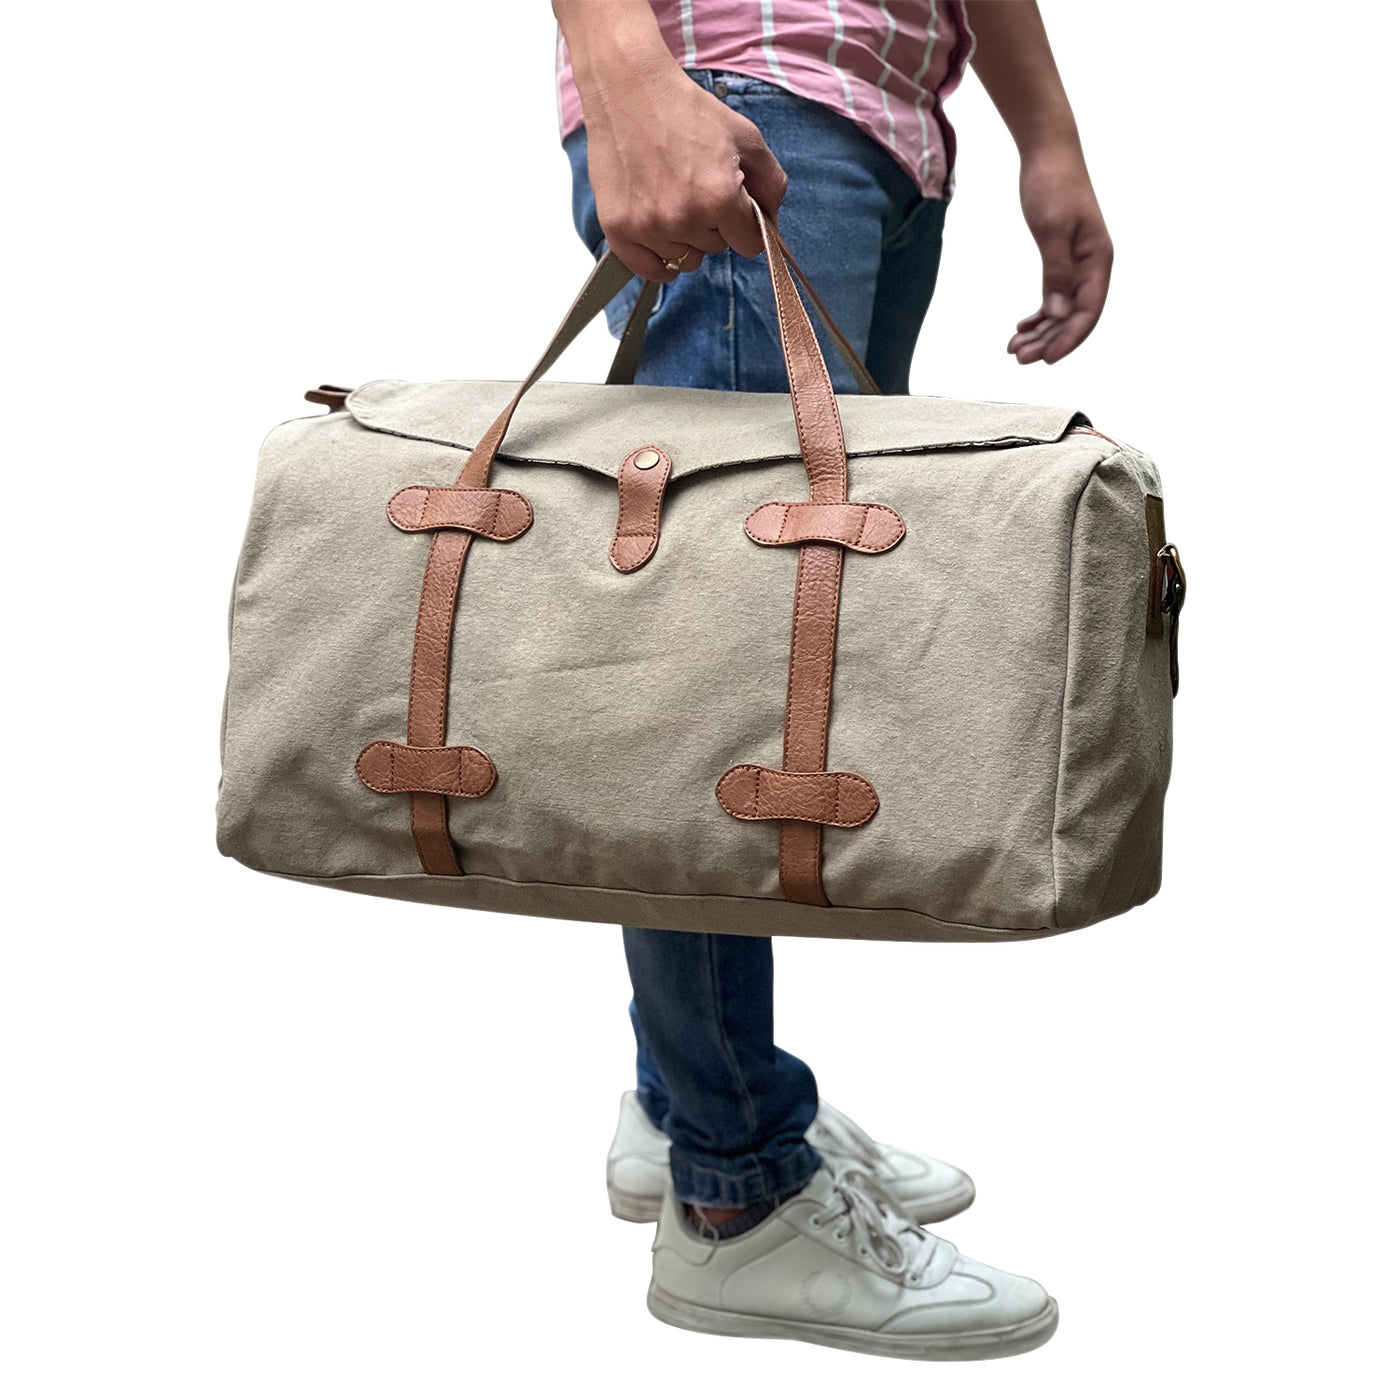 Mona B - Brown 100% Cotton Canvas Duffel Gym Travel and Sports Bag with Outside Zippered Pocket and Stylish Design for Men and Women